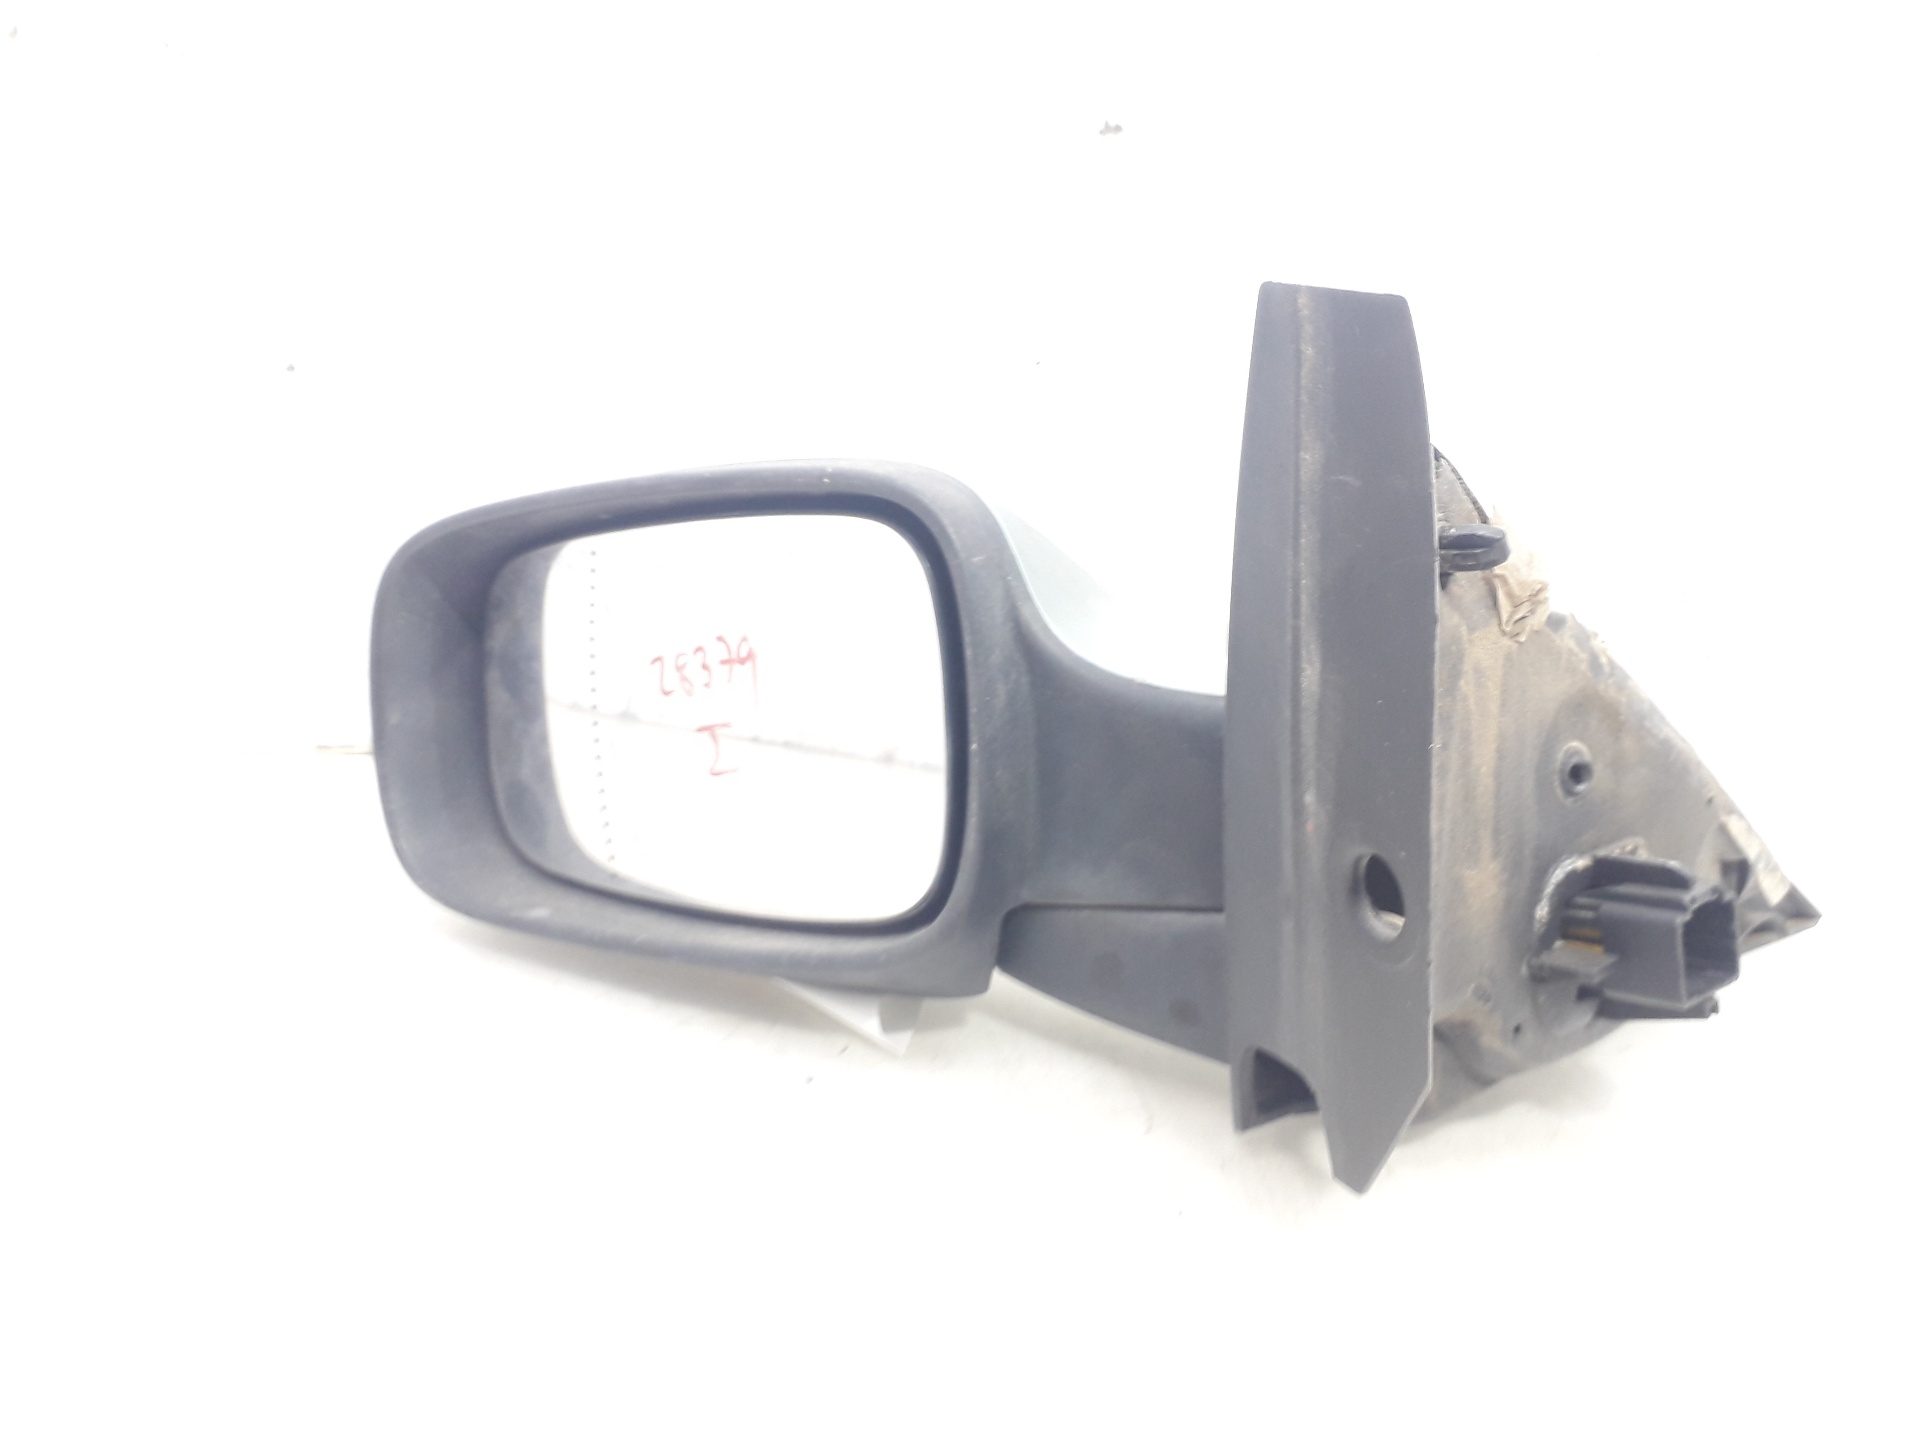 RENAULT Scenic 2 generation (2003-2010) Left Side Wing Mirror 12354060 18802678